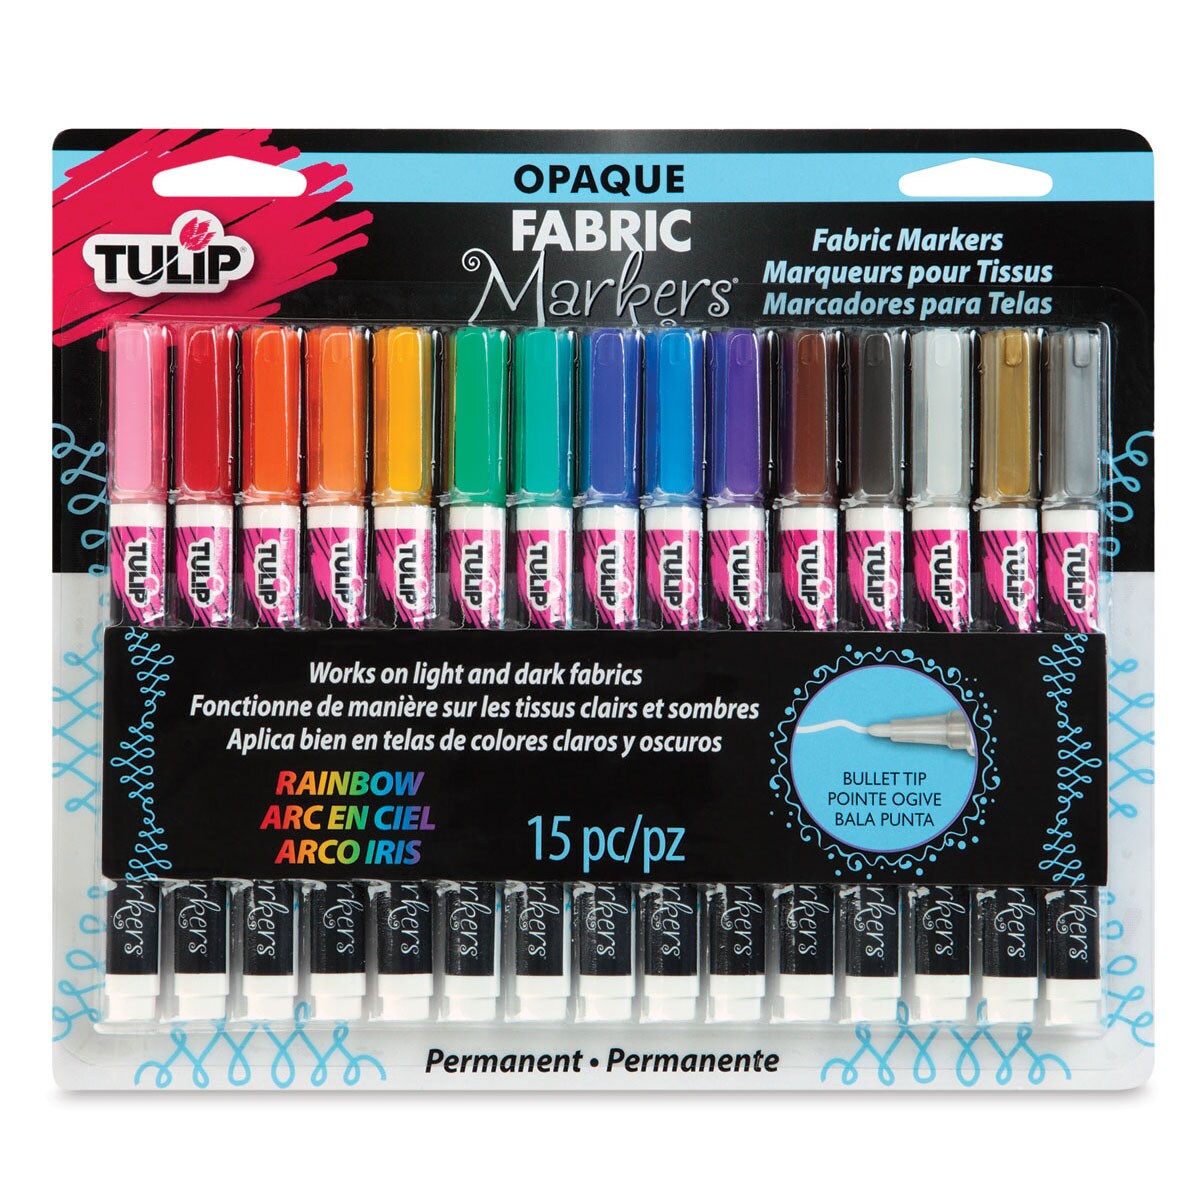 Tulip Opaque Bullet Tip Fabric Markers - Set of 15